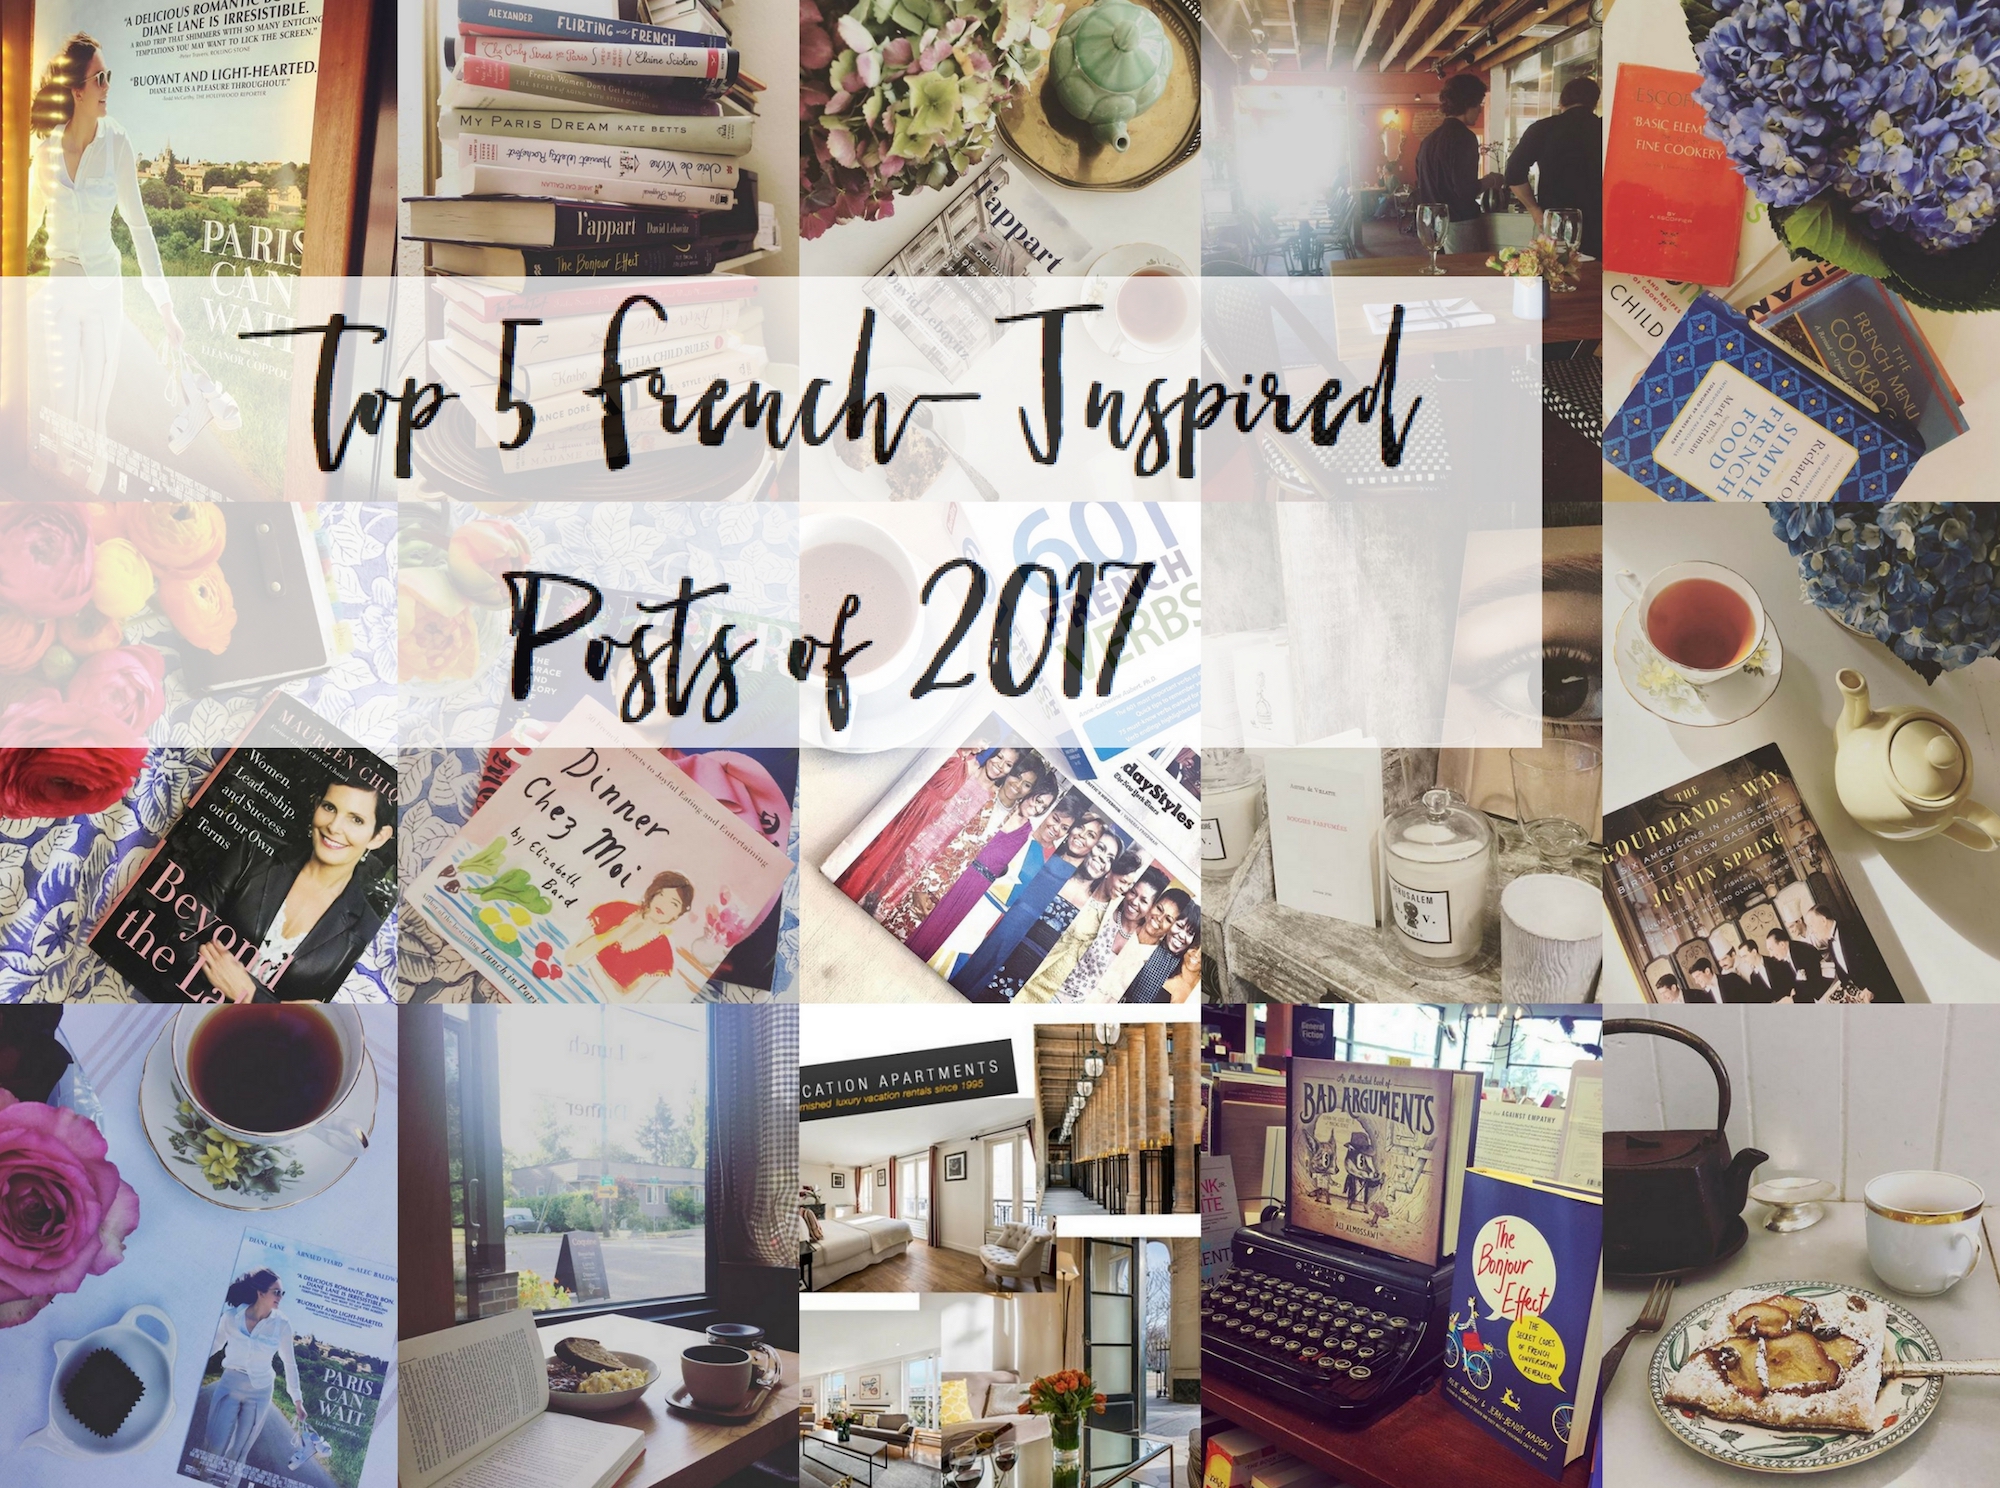 Top 5 French-Inspired Posts in 2017